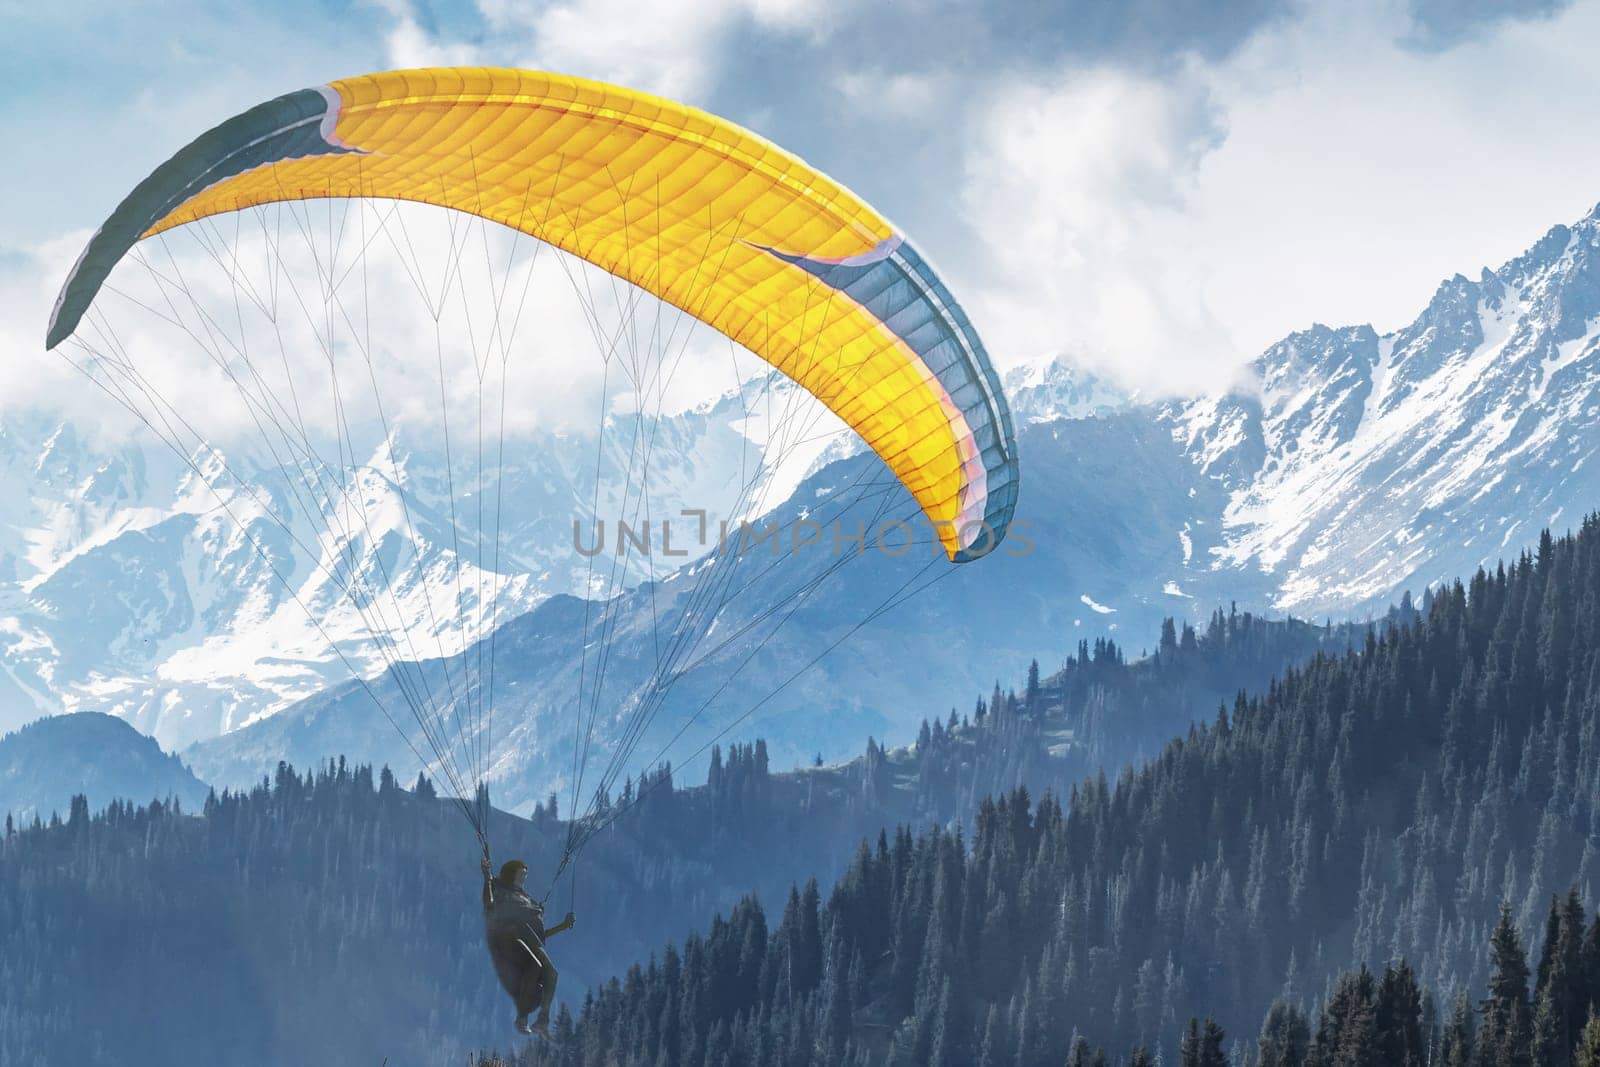 A paraglider flies against the backdrop of picturesque snow-capped mountains.